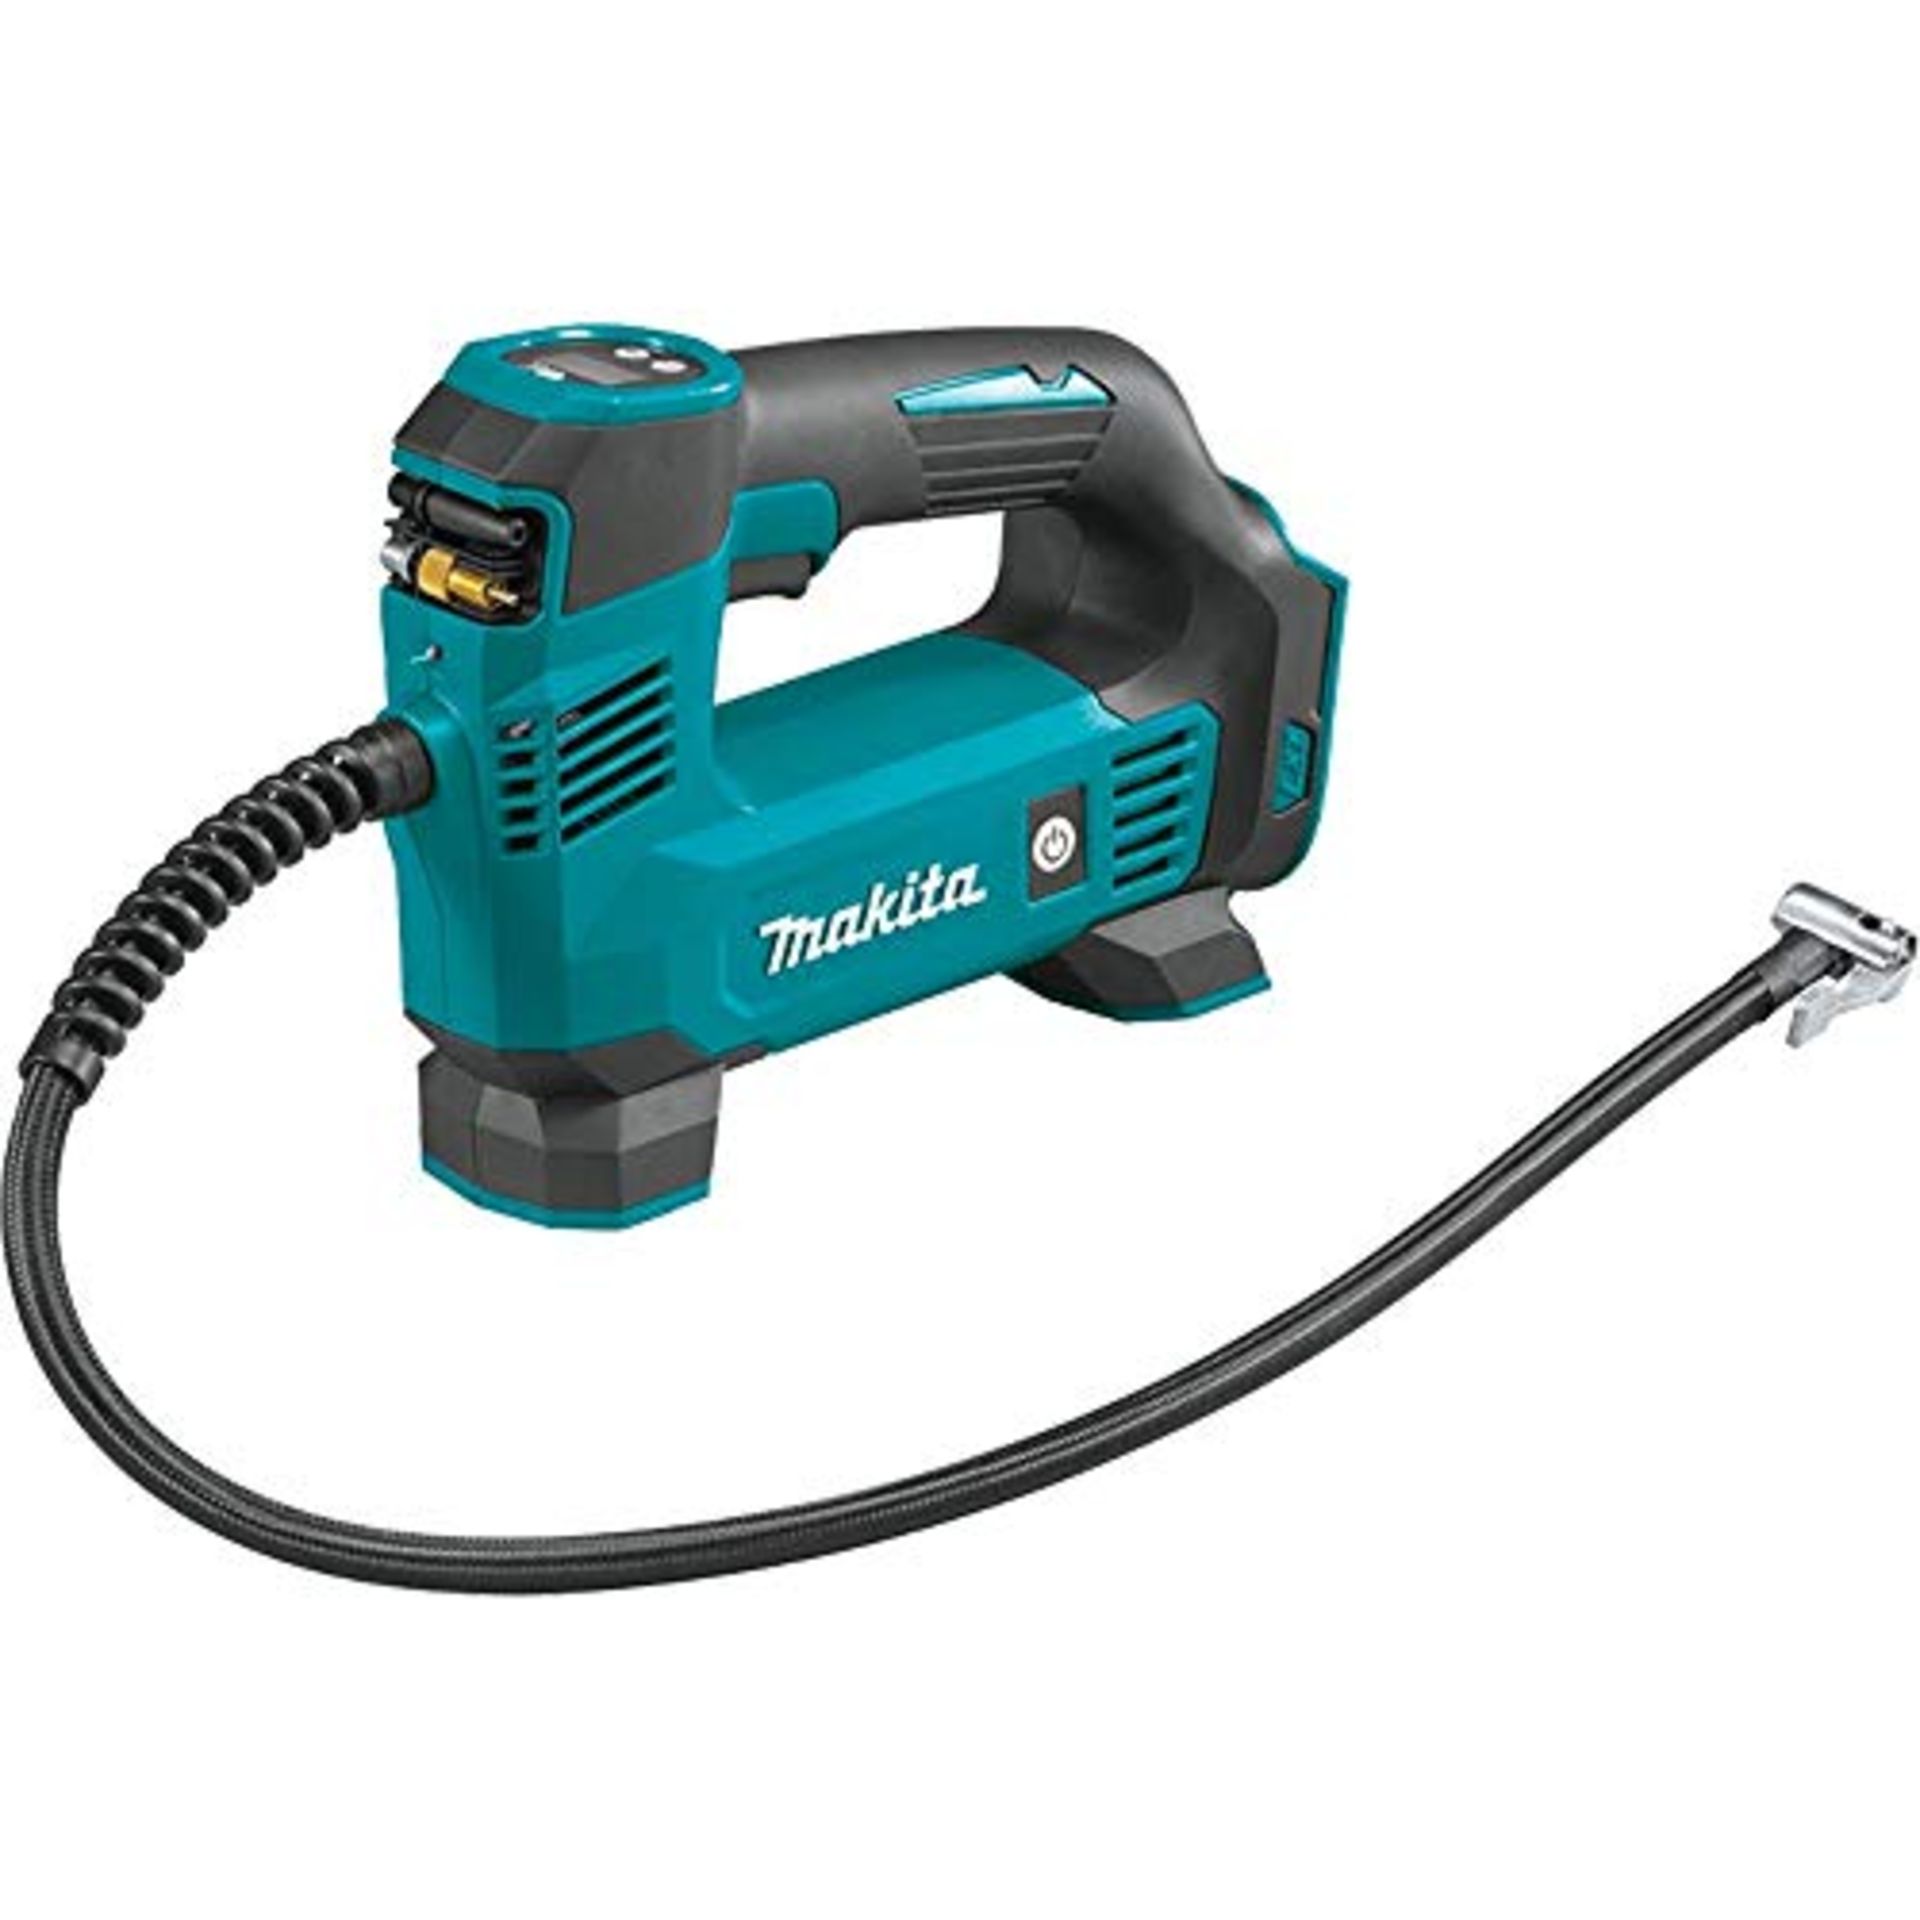 Makita DMP180Z 18V Li-ion LXT Inflator - Batteries and Charger Not Included, Blue/Silv - Image 7 of 10